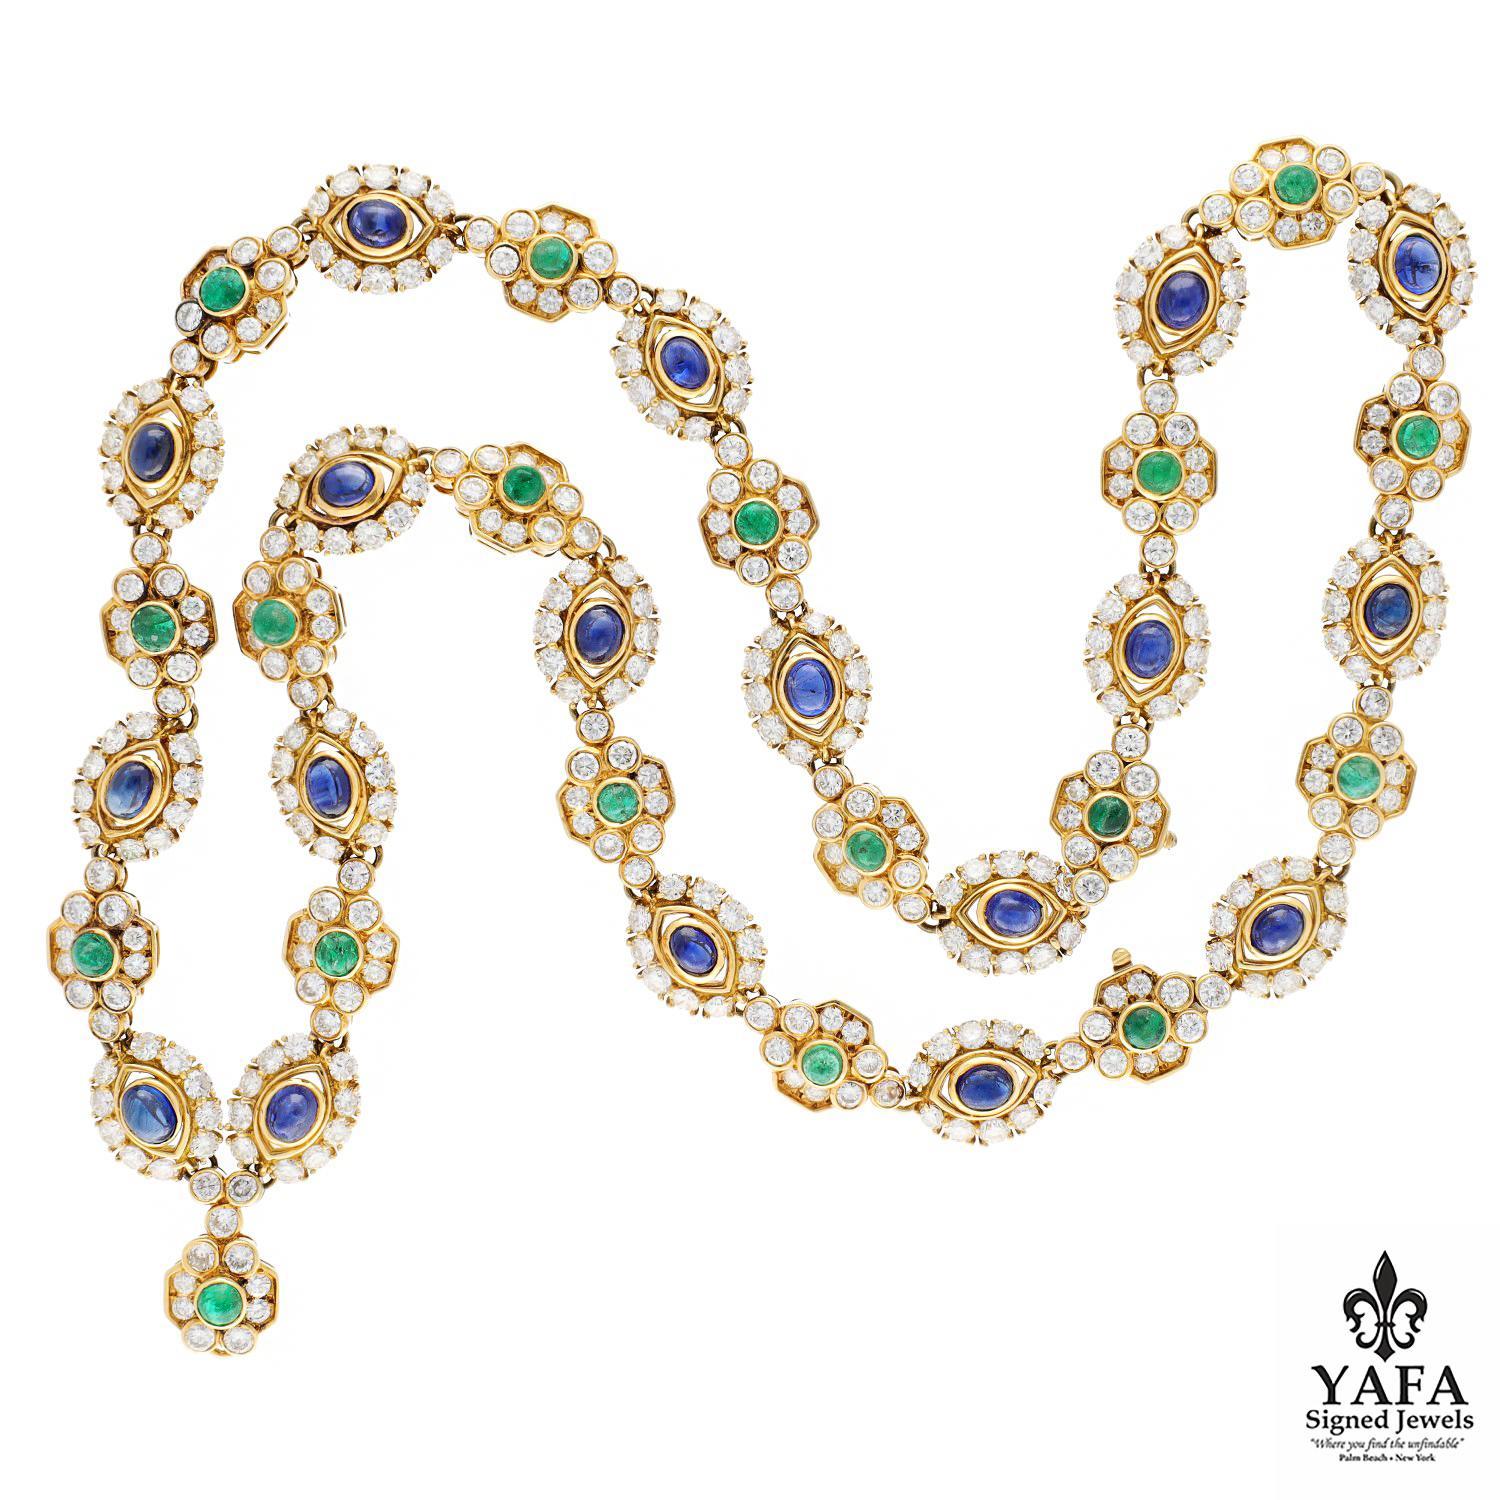 Alternating Cabochon Sapphires and Emeralds Encircled with White Diamonds, This Singularly Exception Necklace/Bracelet is an Outstanding Illustration of the Artistry Displayed by Harry Winston. Wearable as Matinee or Princess Length Sans the